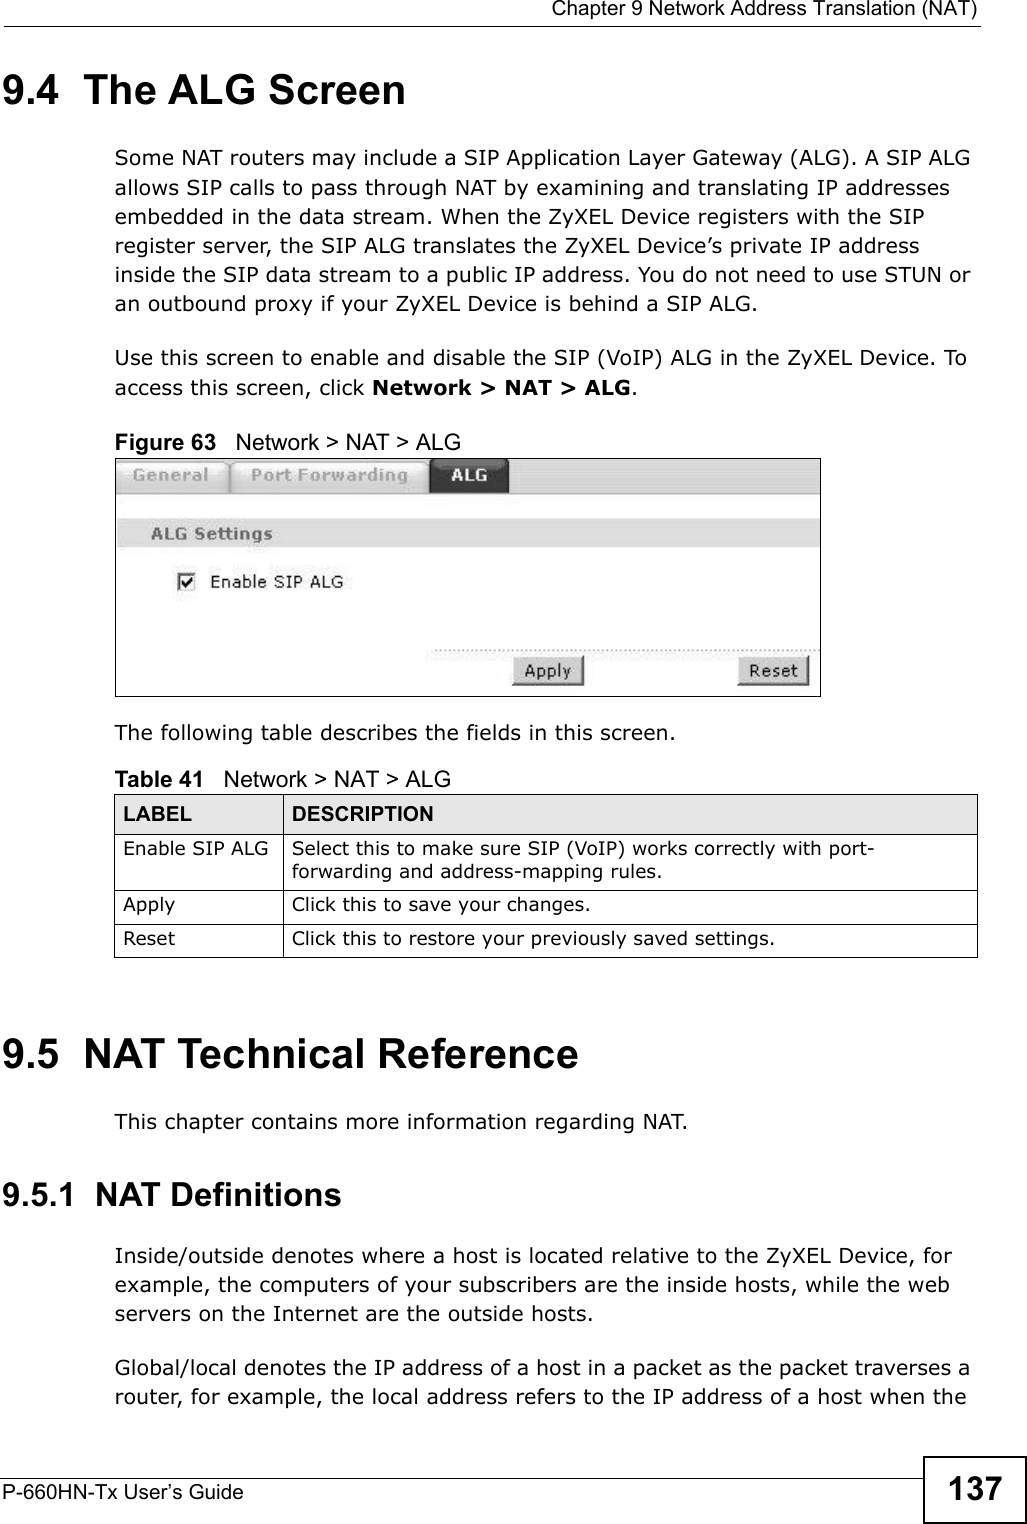  Chapter 9 Network Address Translation (NAT)P-660HN-Tx User’s Guide 1379.4  The ALG ScreenSome NAT routers may include a SIP Application Layer Gateway (ALG). A SIP ALG allows SIP calls to pass through NAT by examining and translating IP addresses embedded in the data stream. When the ZyXEL Device registers with the SIP register server, the SIP ALG translates the ZyXEL Device’s private IP address inside the SIP data stream to a public IP address. You do not need to use STUN or an outbound proxy if your ZyXEL Device is behind a SIP ALG.Use this screen to enable and disable the SIP (VoIP) ALG in the ZyXEL Device. To access this screen, click Network &gt; NAT &gt; ALG.Figure 63   Network &gt; NAT &gt; ALGThe following table describes the fields in this screen.9.5  NAT Technical ReferenceThis chapter contains more information regarding NAT.9.5.1  NAT DefinitionsInside/outside denotes where a host is located relative to the ZyXEL Device, for example, the computers of your subscribers are the inside hosts, while the web servers on the Internet are the outside hosts. Global/local denotes the IP address of a host in a packet as the packet traverses a router, for example, the local address refers to the IP address of a host when the Table 41   Network &gt; NAT &gt; ALGLABEL DESCRIPTIONEnable SIP ALG Select this to make sure SIP (VoIP) works correctly with port-forwarding and address-mapping rules.Apply Click this to save your changes.Reset Click this to restore your previously saved settings.